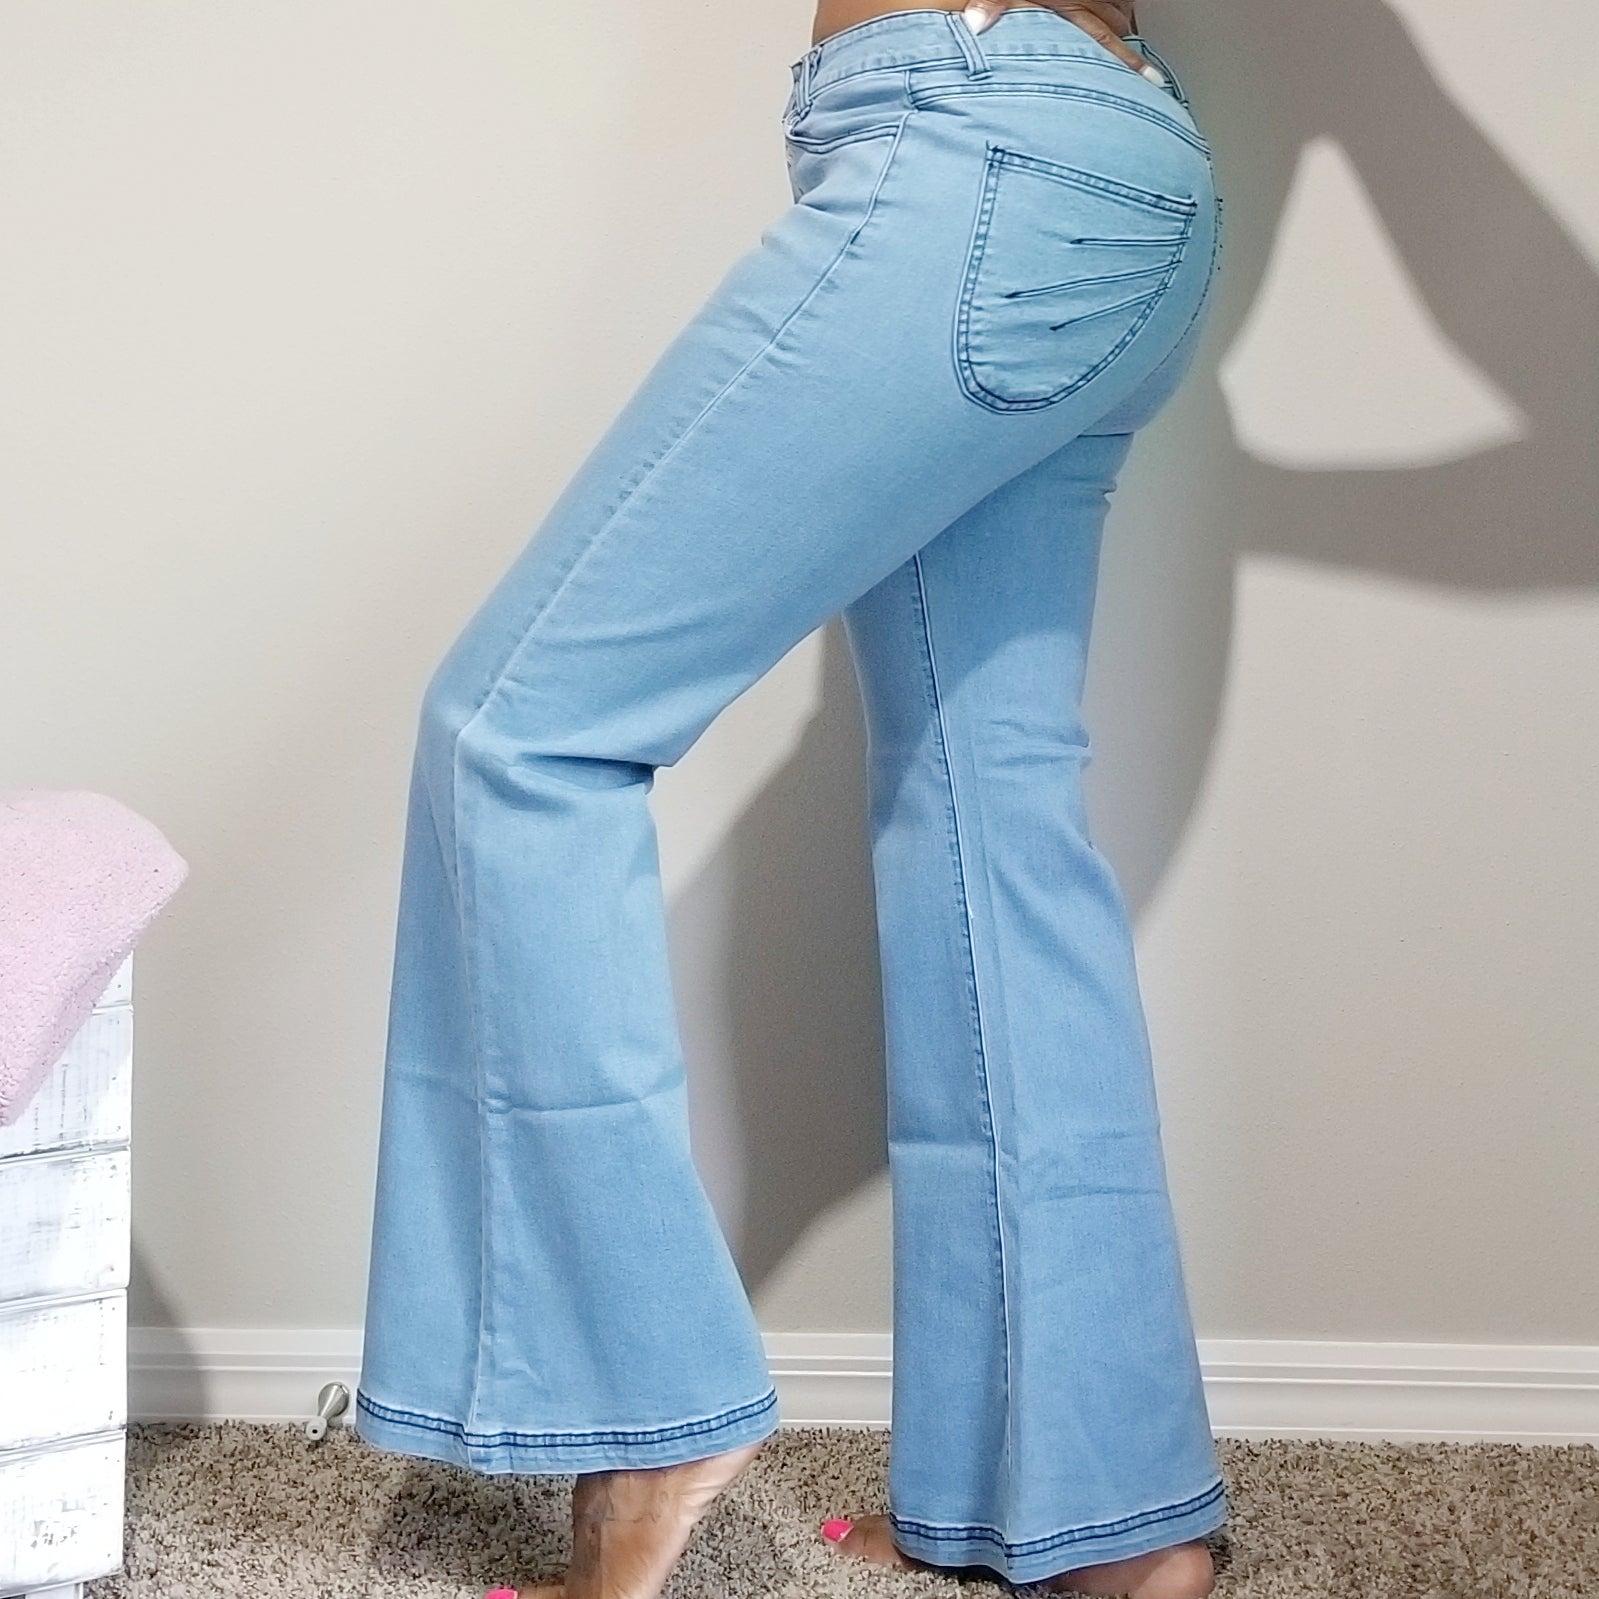 Jeans 1982byree Sky High Flare Jeans